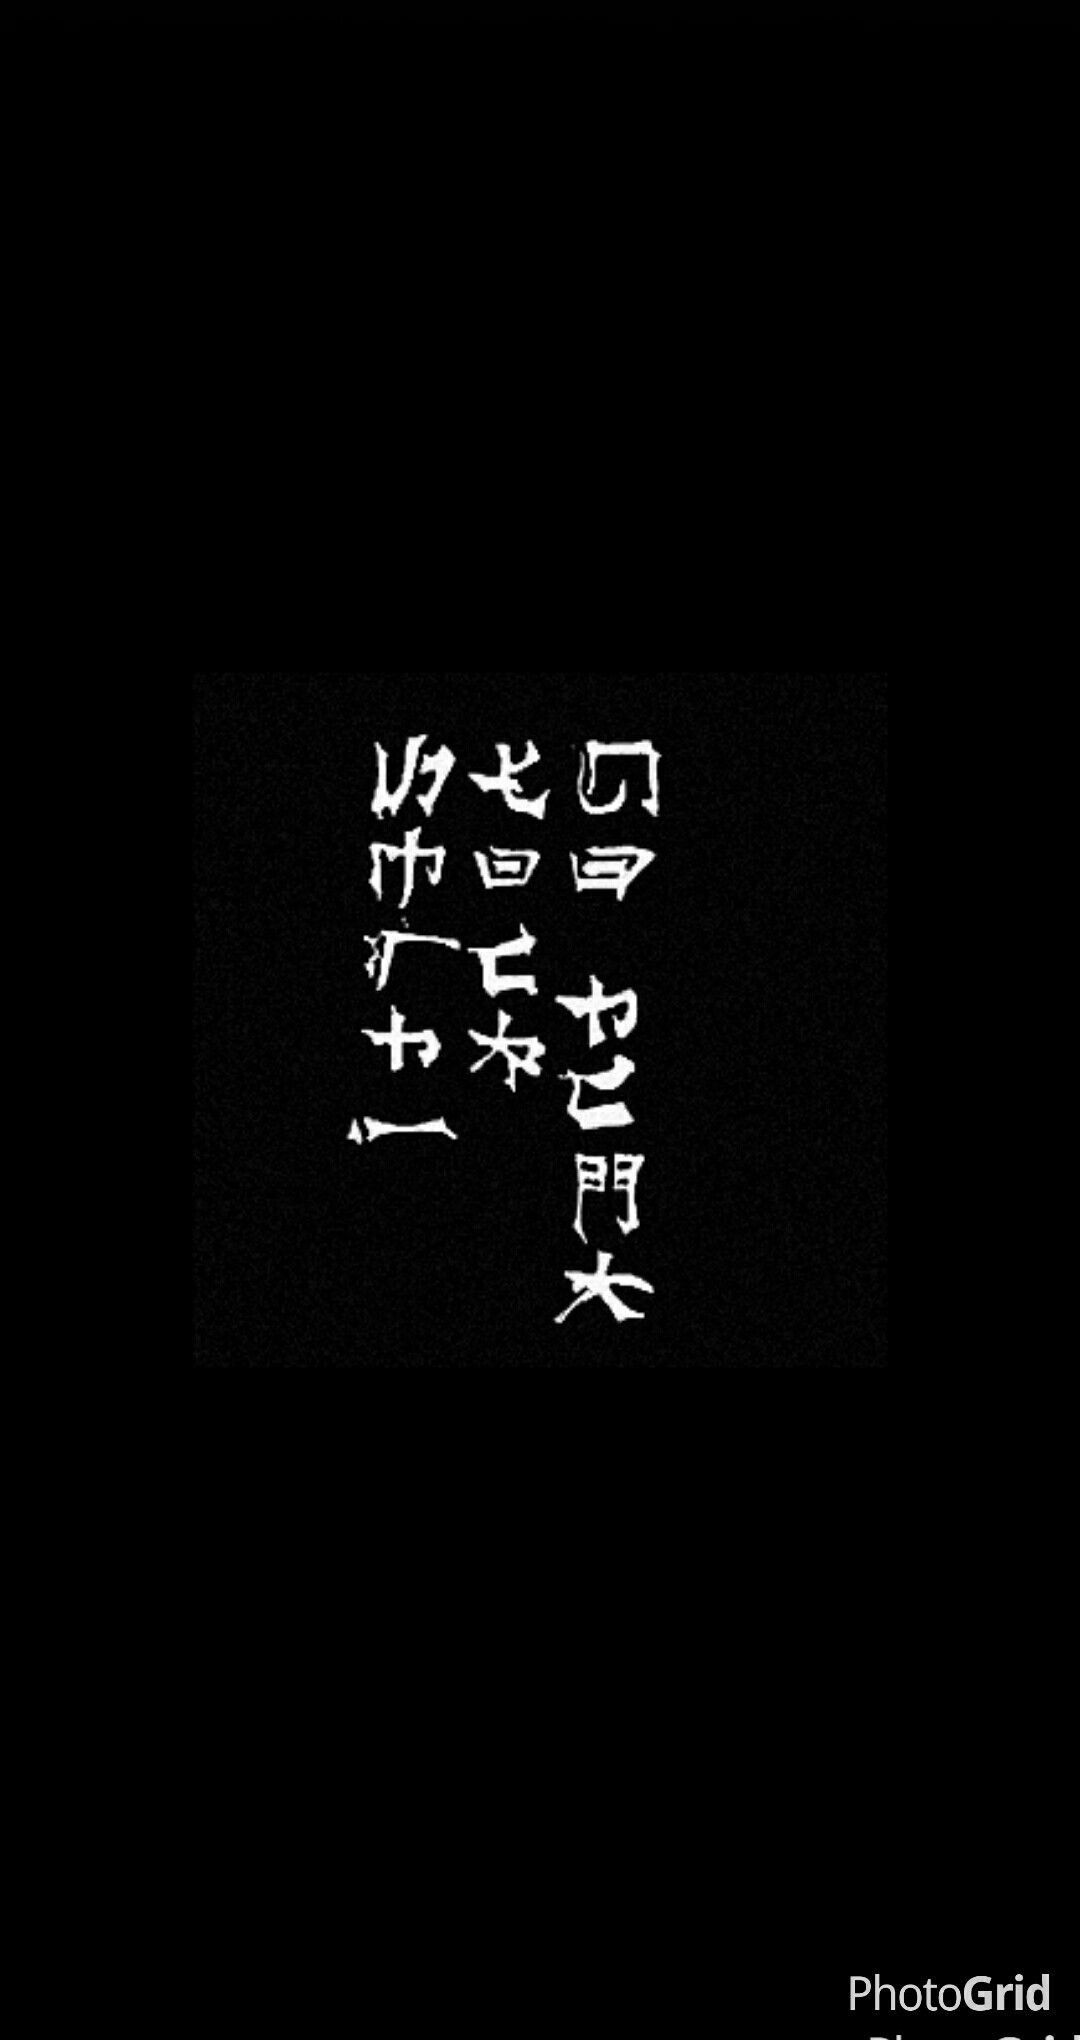 Chinese Words iPhone Wallpaper 2020